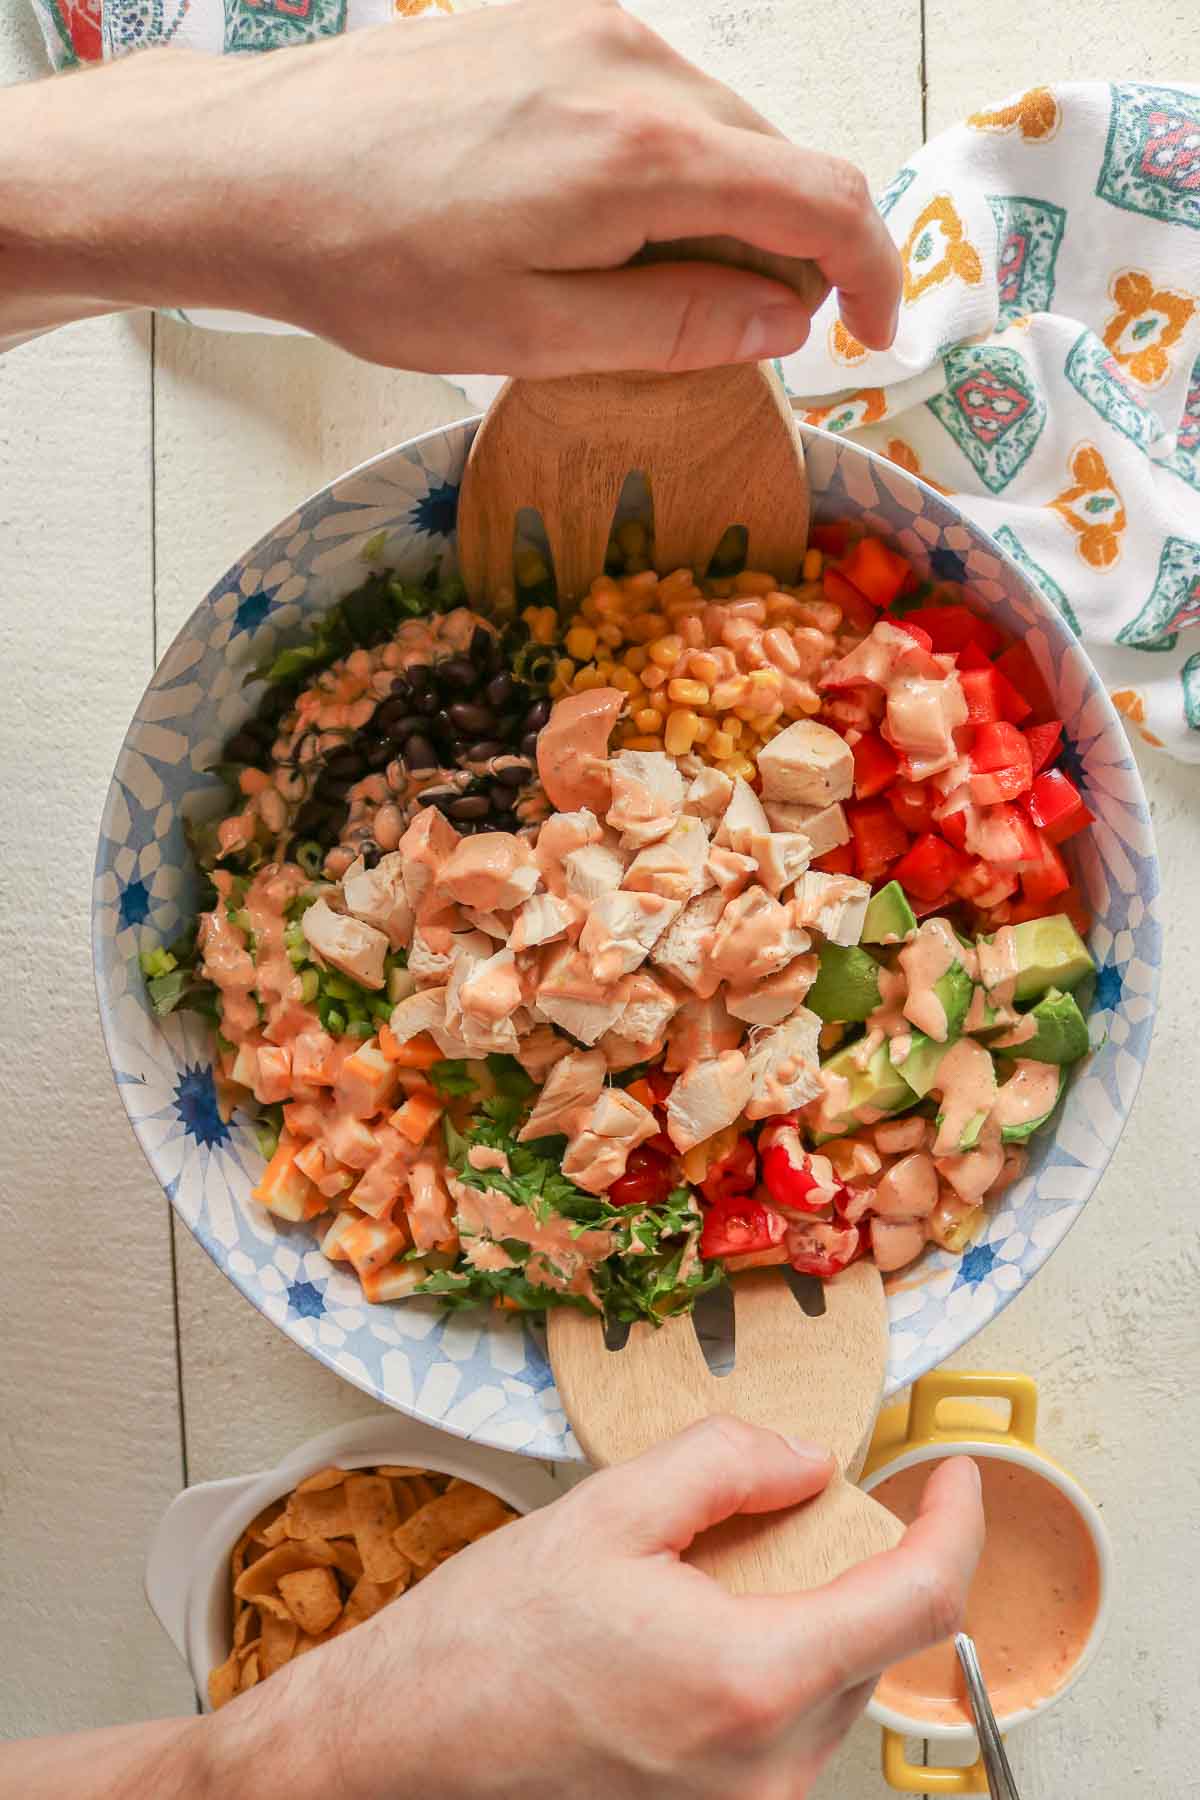 Two hands using salad tossers to mix salad ingredients and dressing together in a serving bowl.